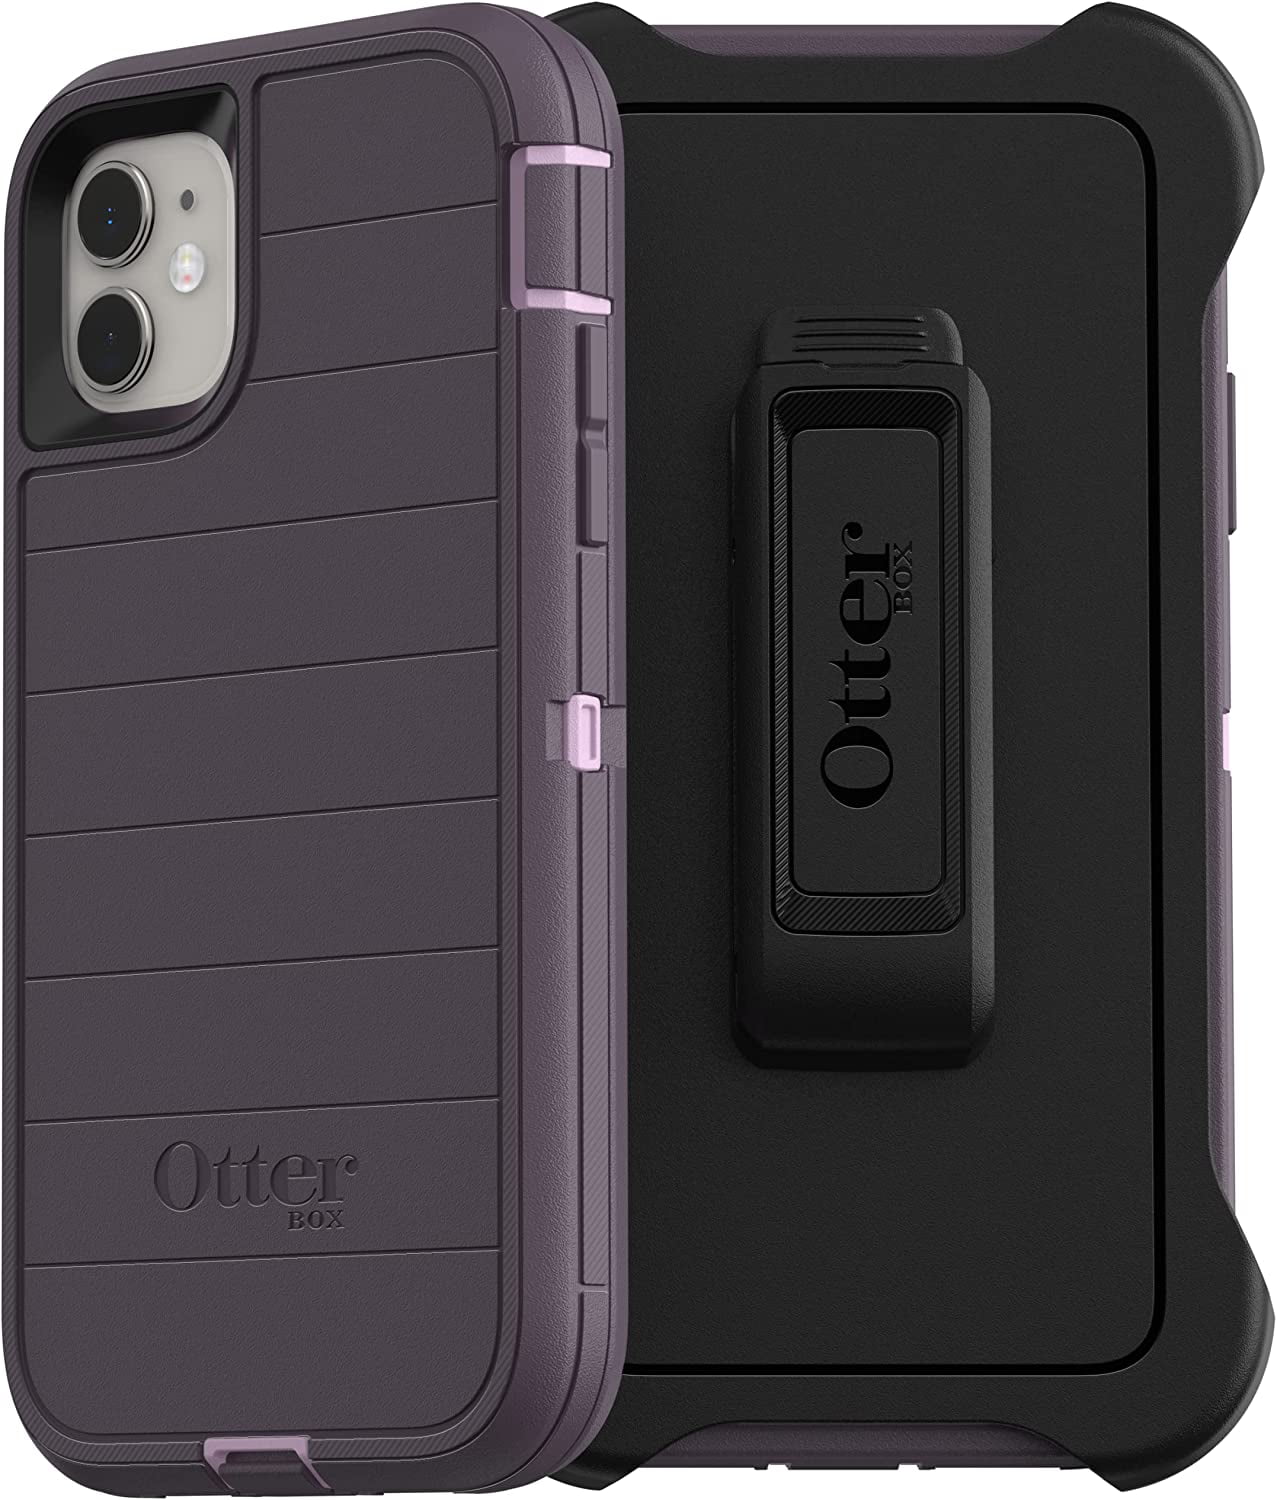 ONLY OtterBox Defender Series Belt Clip Holster Replacement for iPhone 11 Black Non-Retail Packaging 